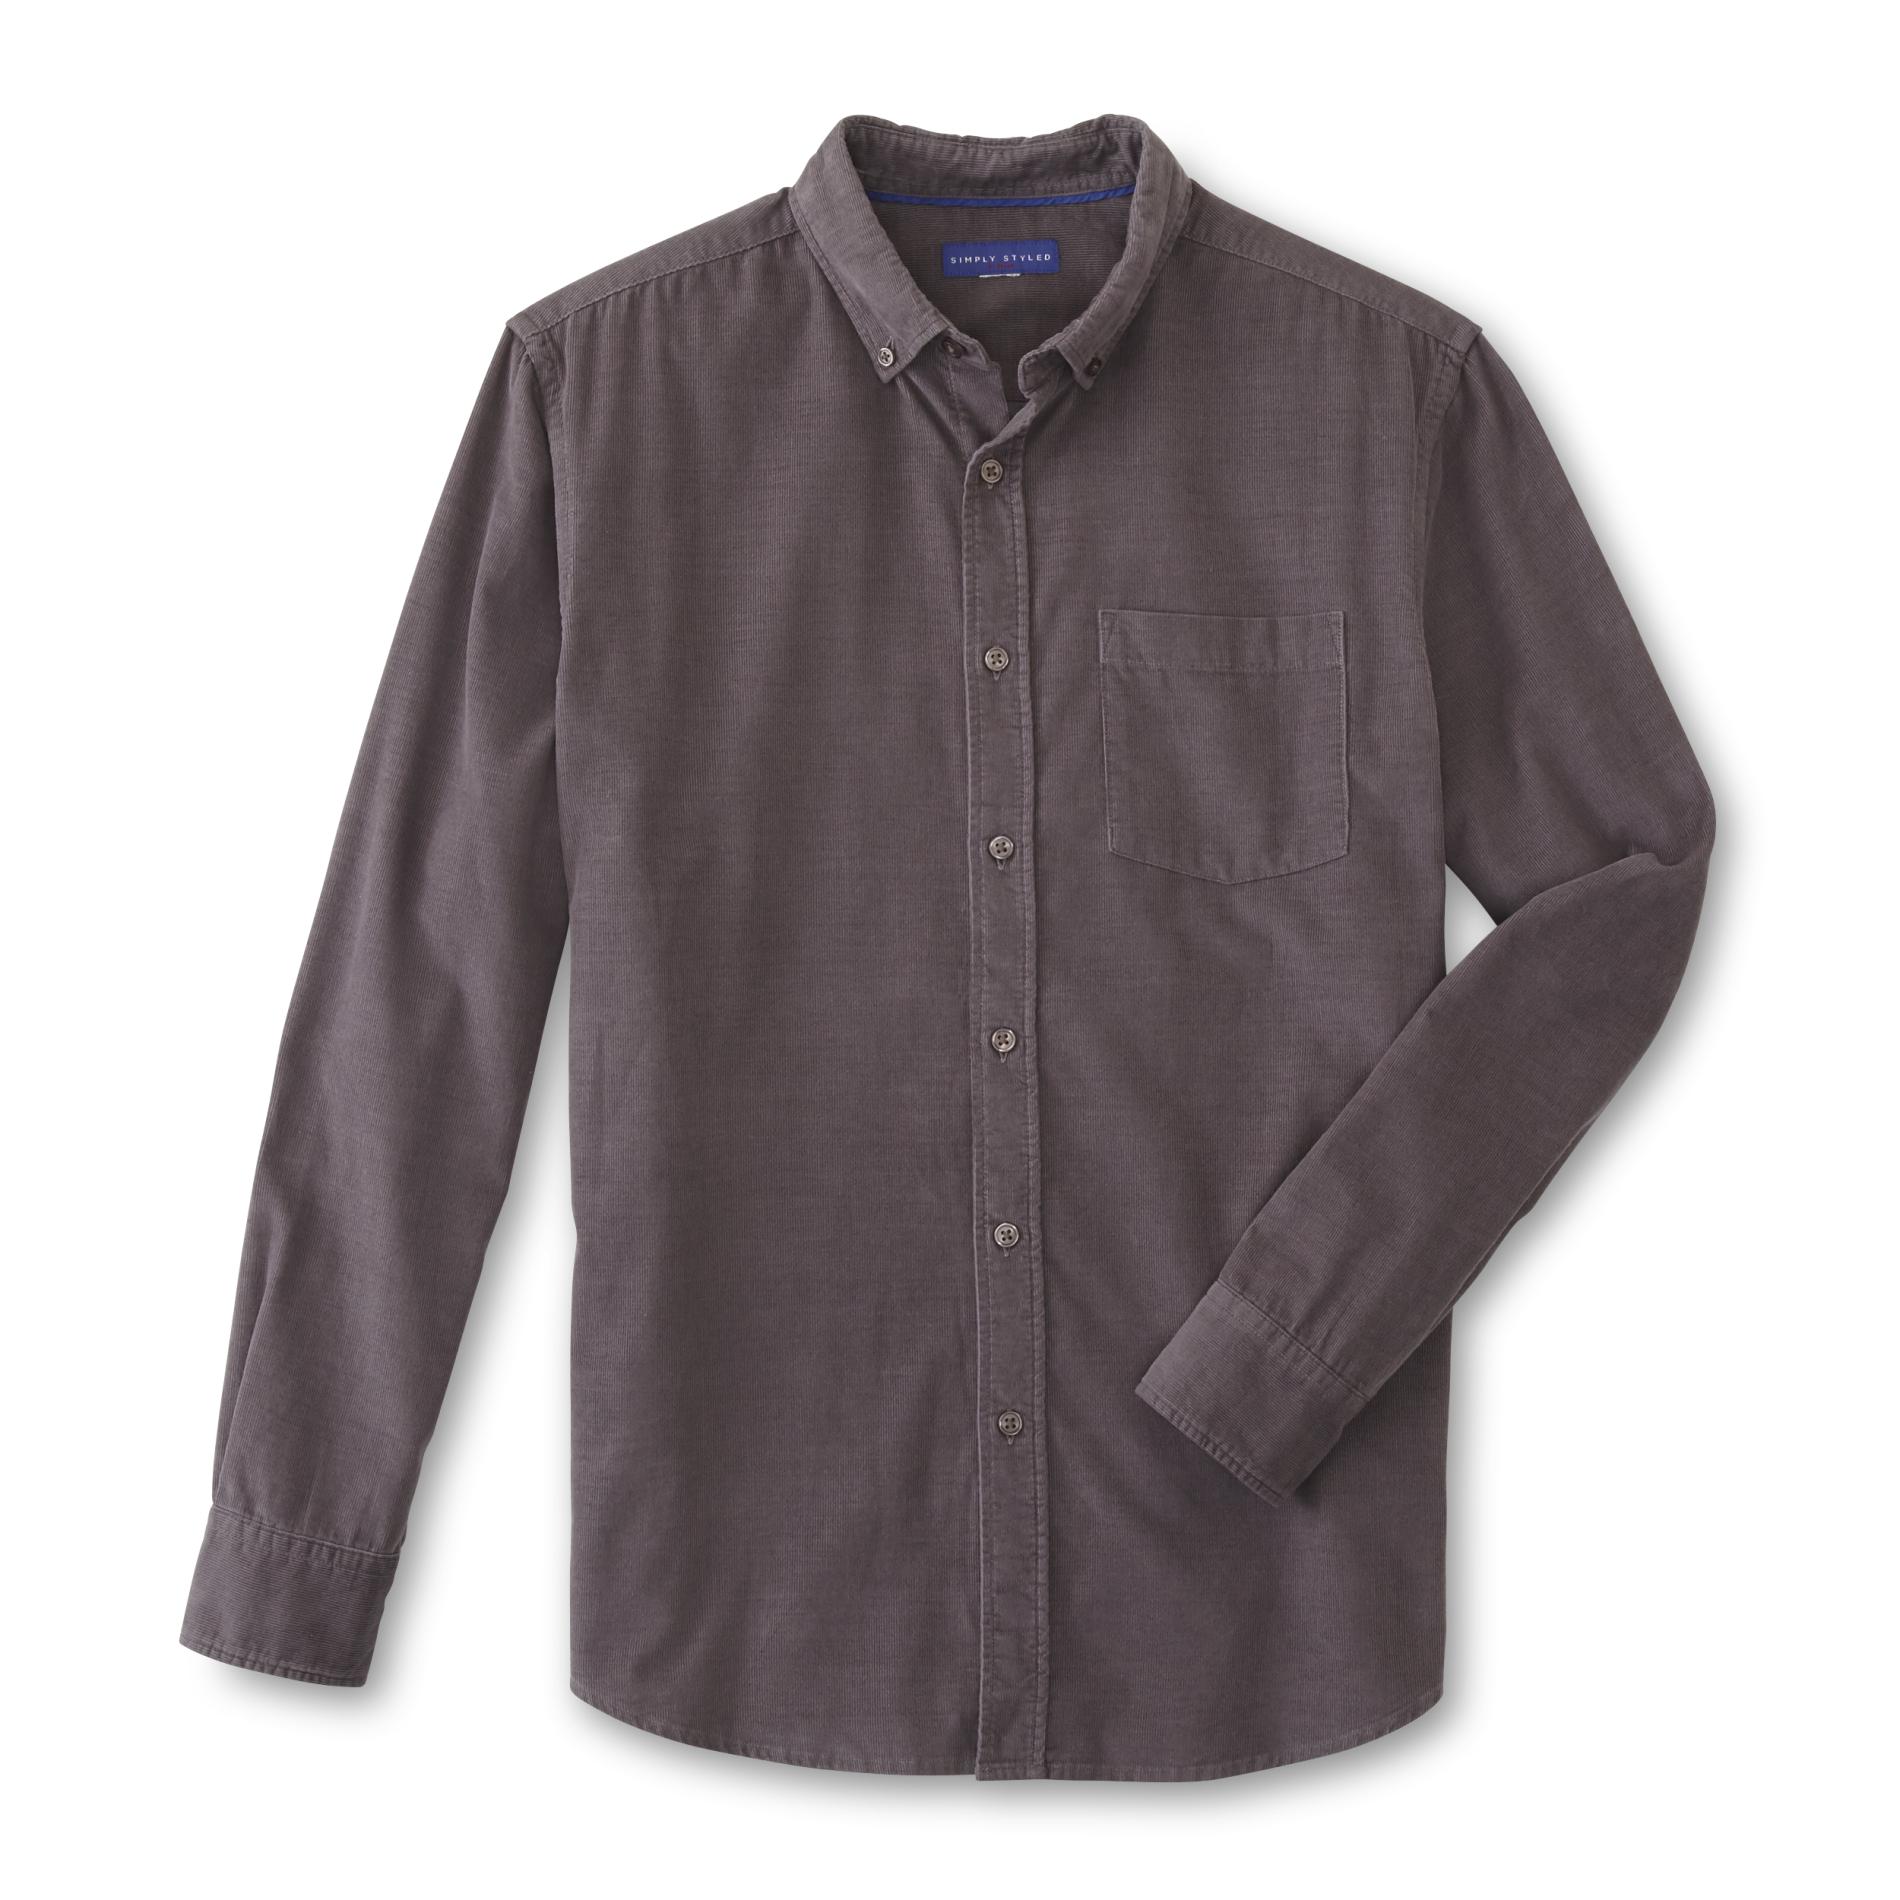 Simply Styled Men's Corduroy Button-Front Shirt